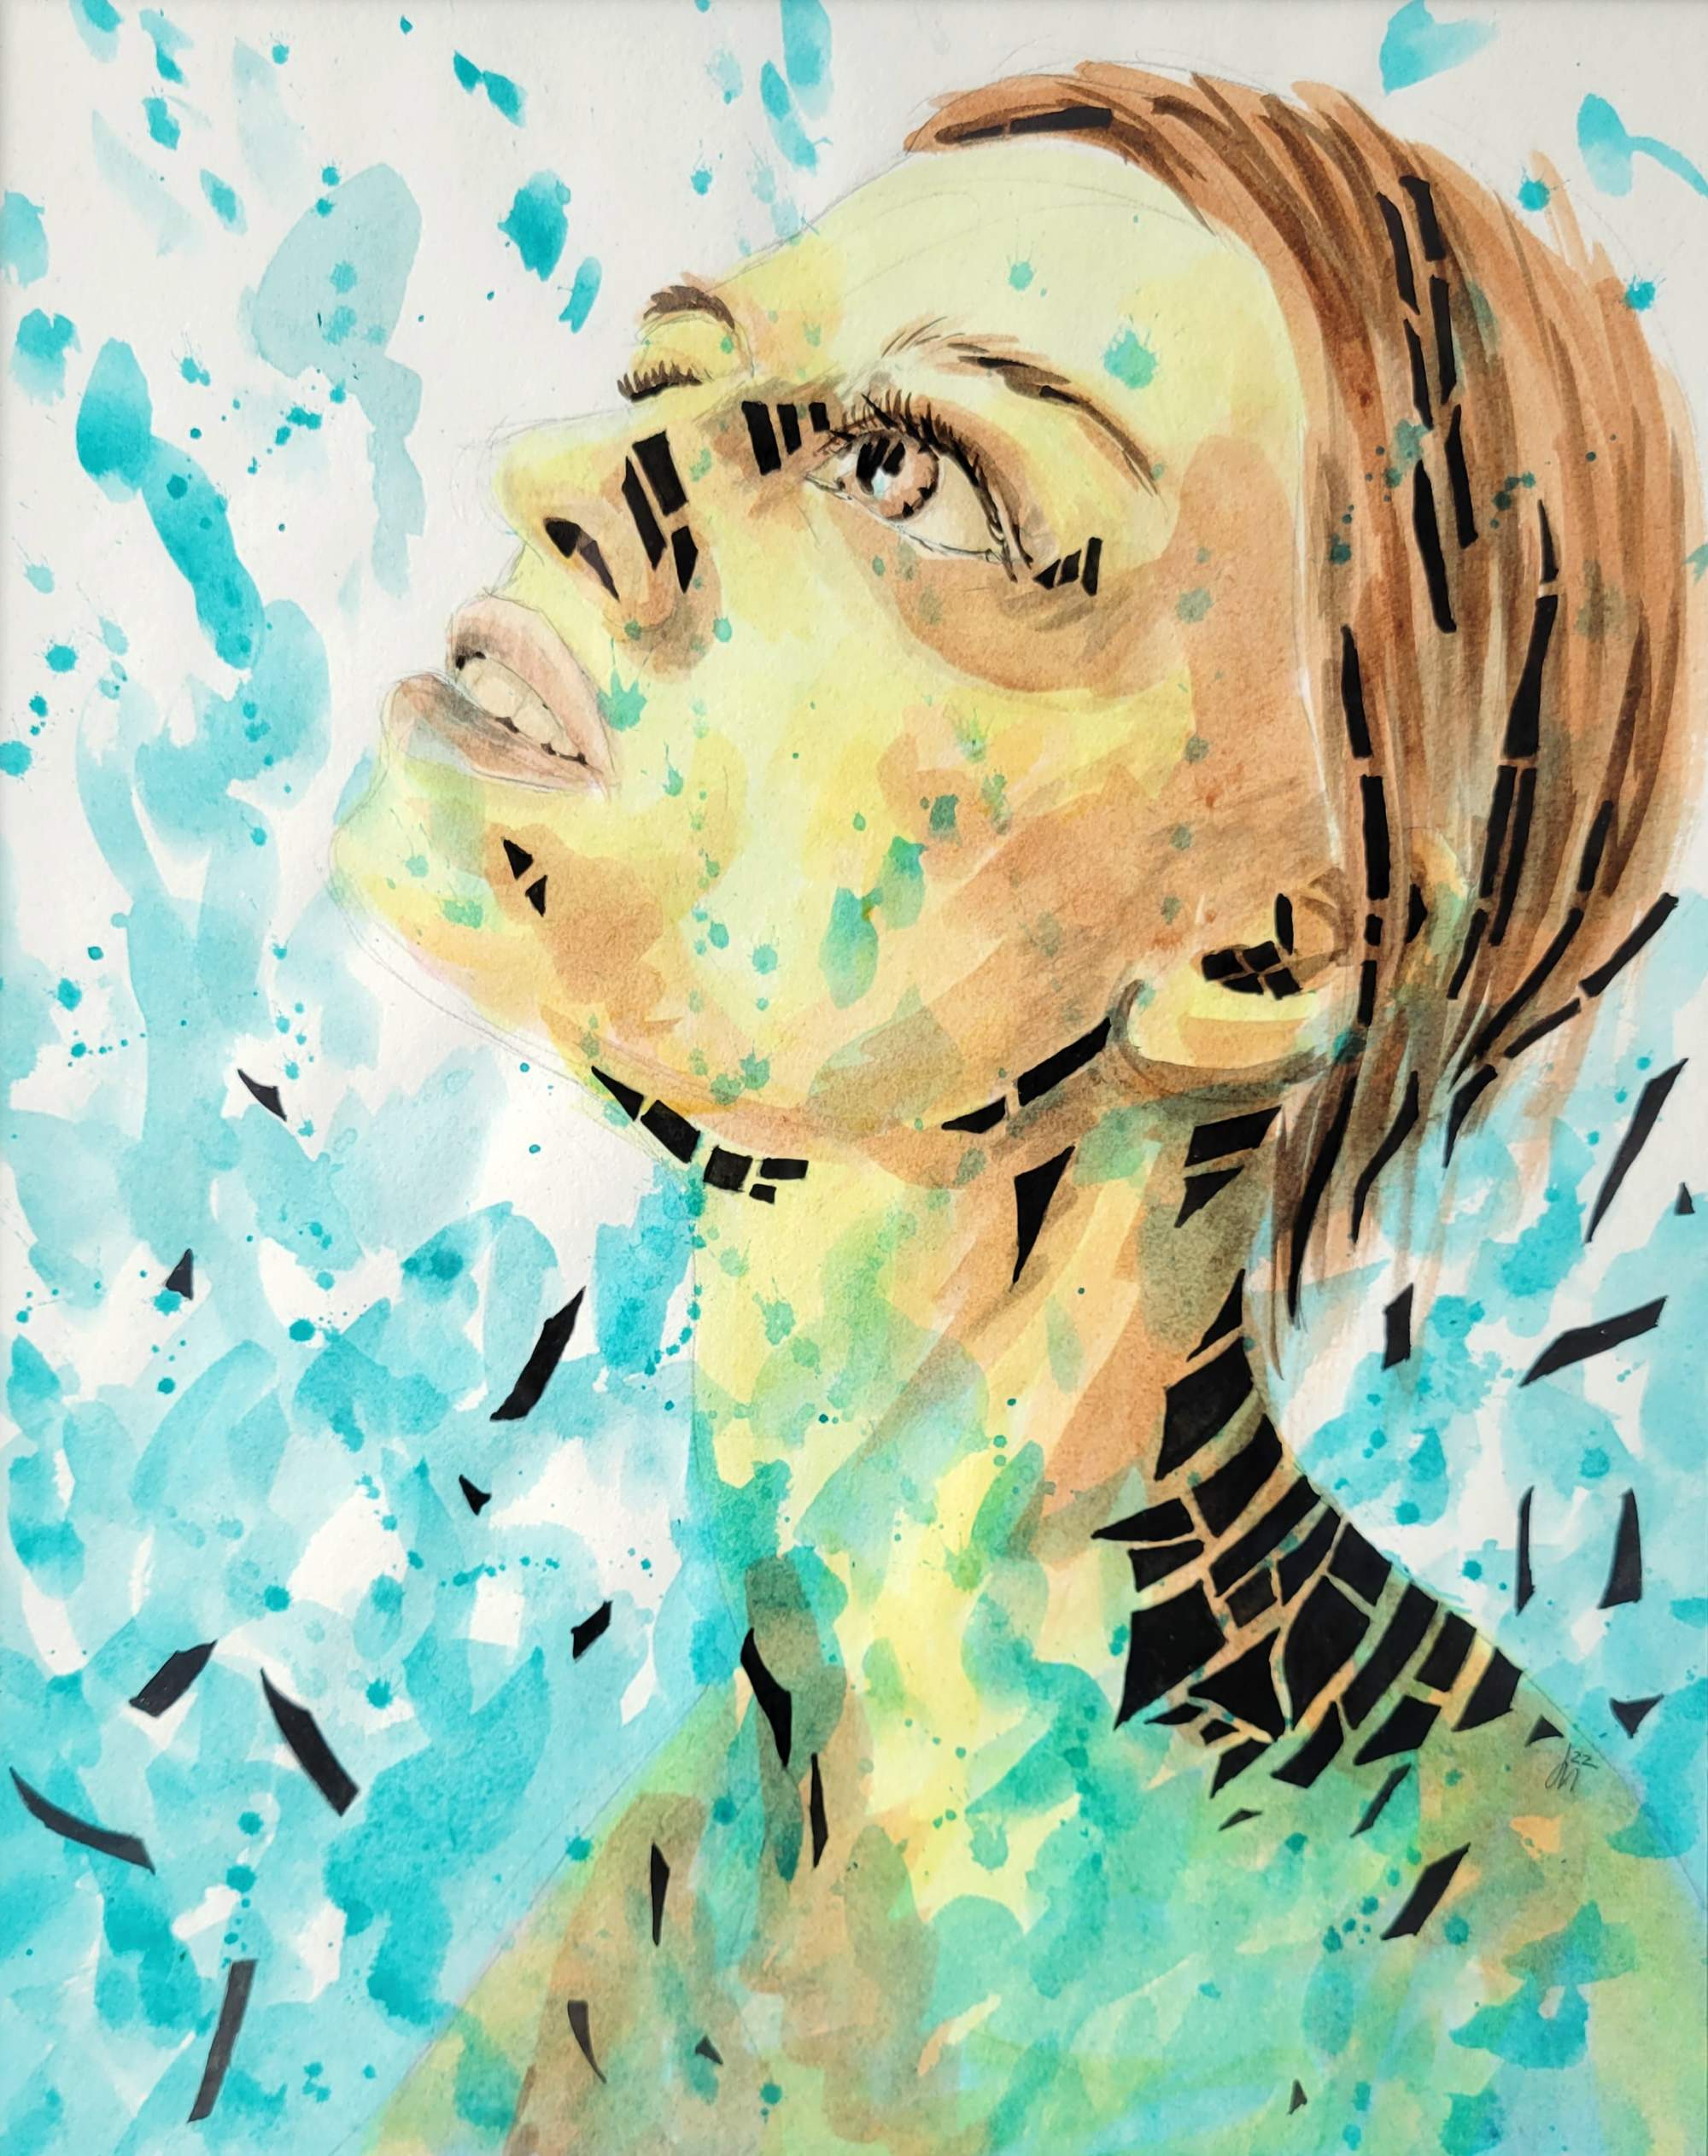 A painting of a woman bursting out of water